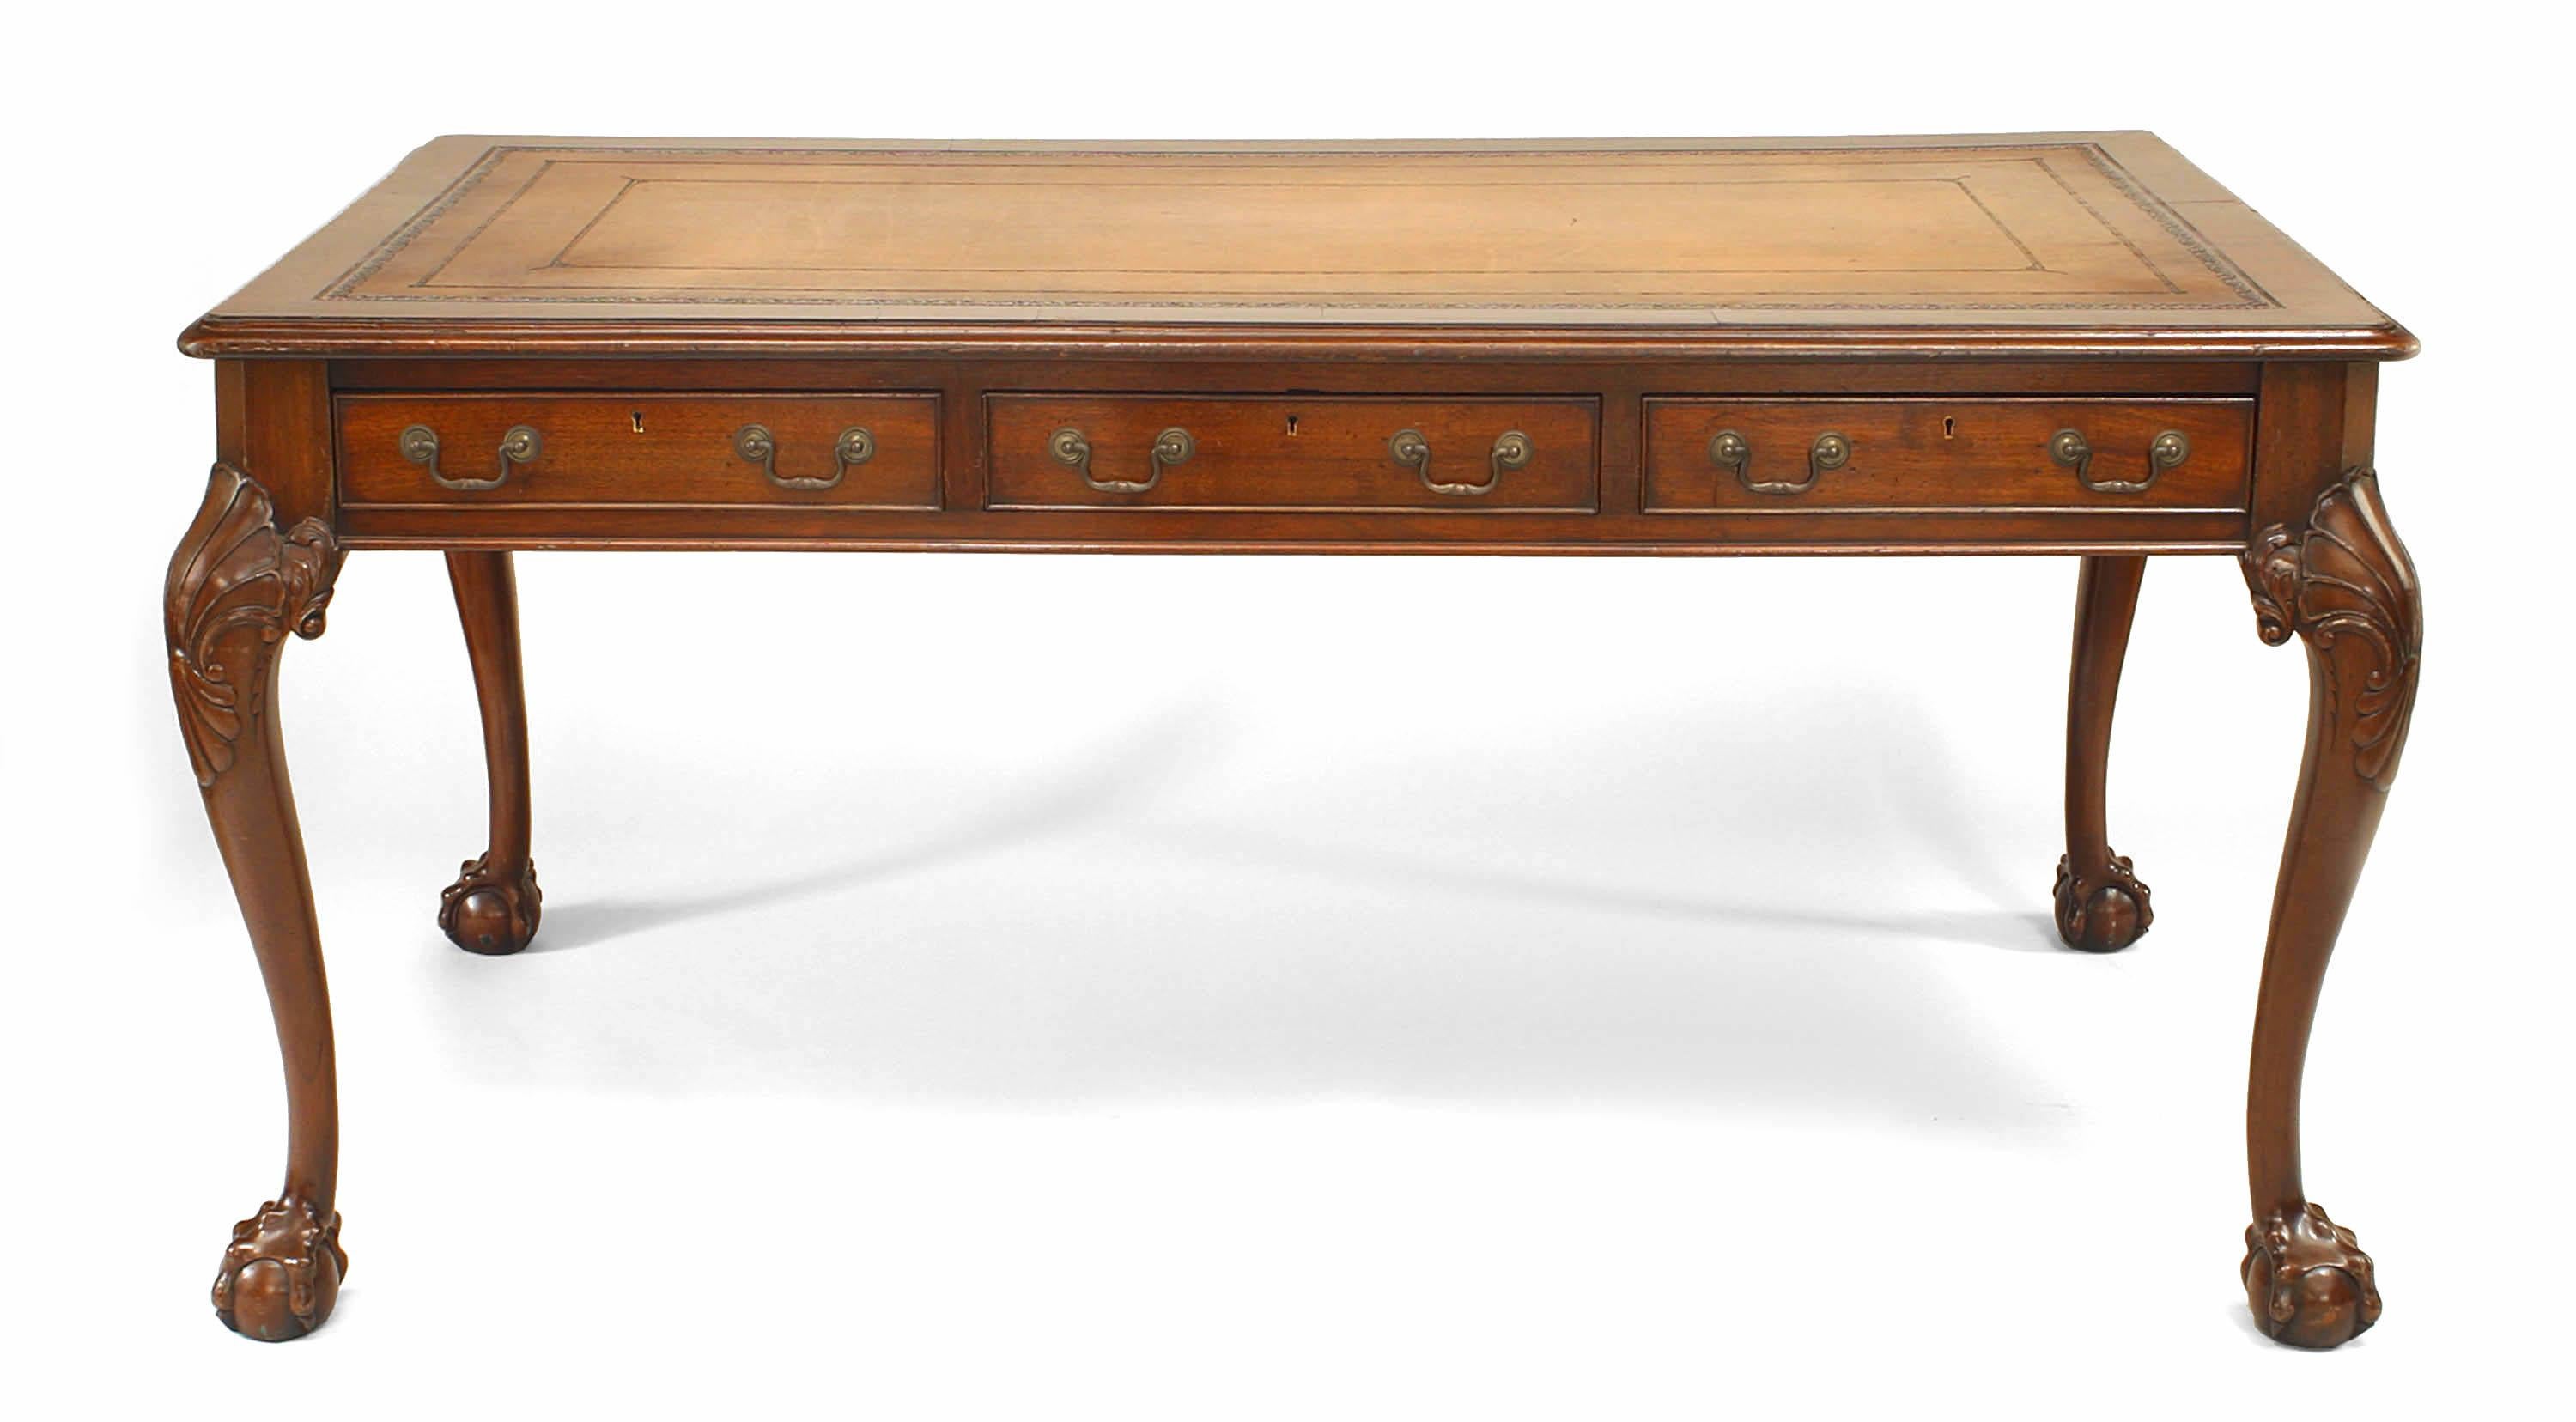 English Chippendale style (20th Century) mahogany 3 drawer table desk with brown leather top.
